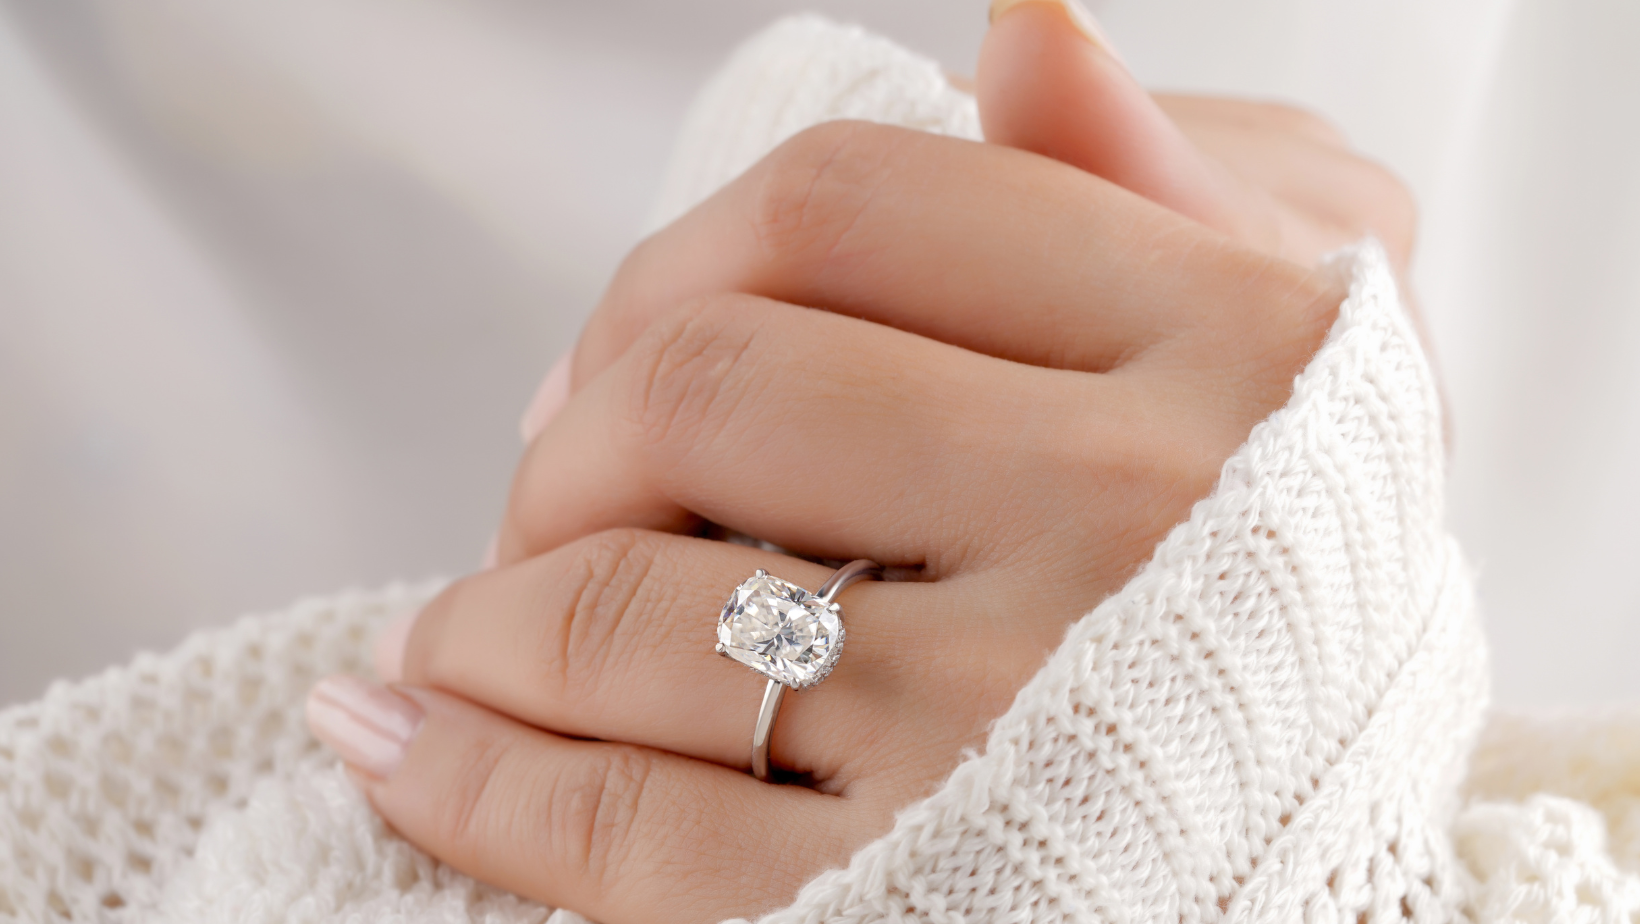 Uncover The Romance Of Elegant Engagement Rings: A Journey Through Halo And Three Stone Settings